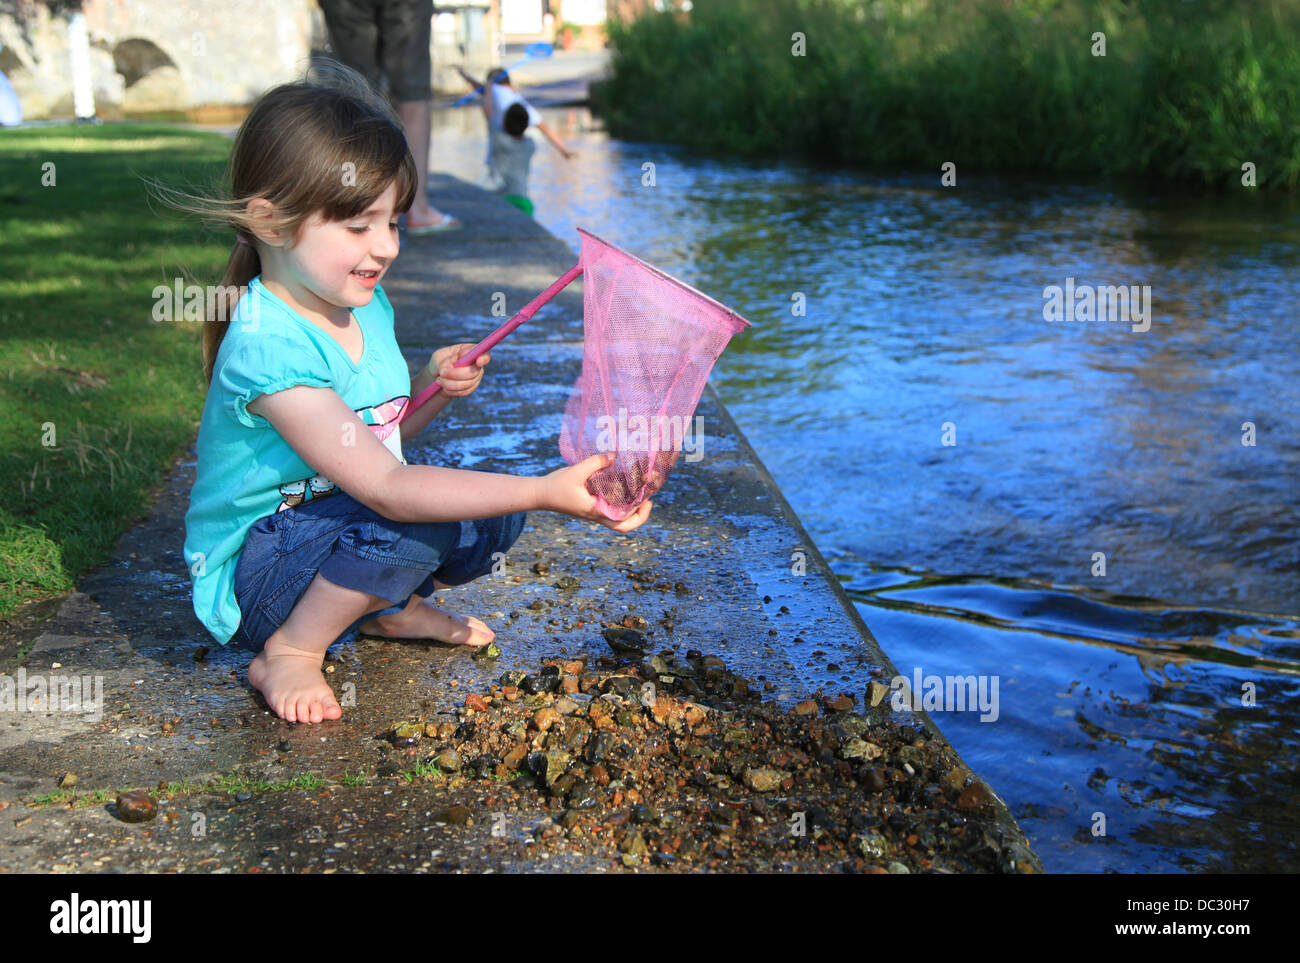 Teen Girl`s Hand Touching Colourful Fishing Nets Stock Image - Image of  organic, color: 168111499